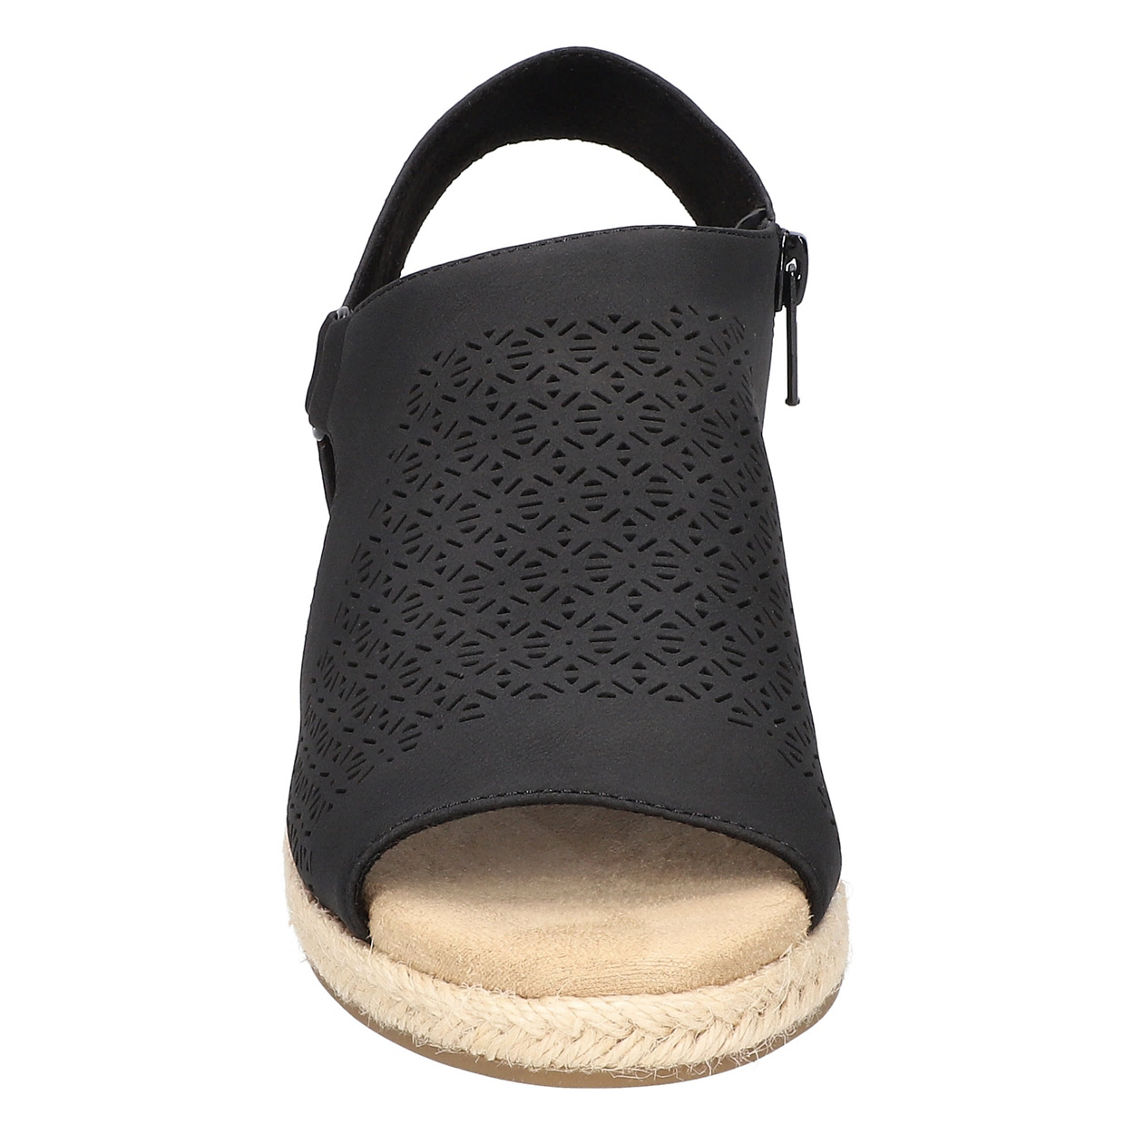 Serena by Easy Street Espadrille Wedge Sandals - Image 2 of 5